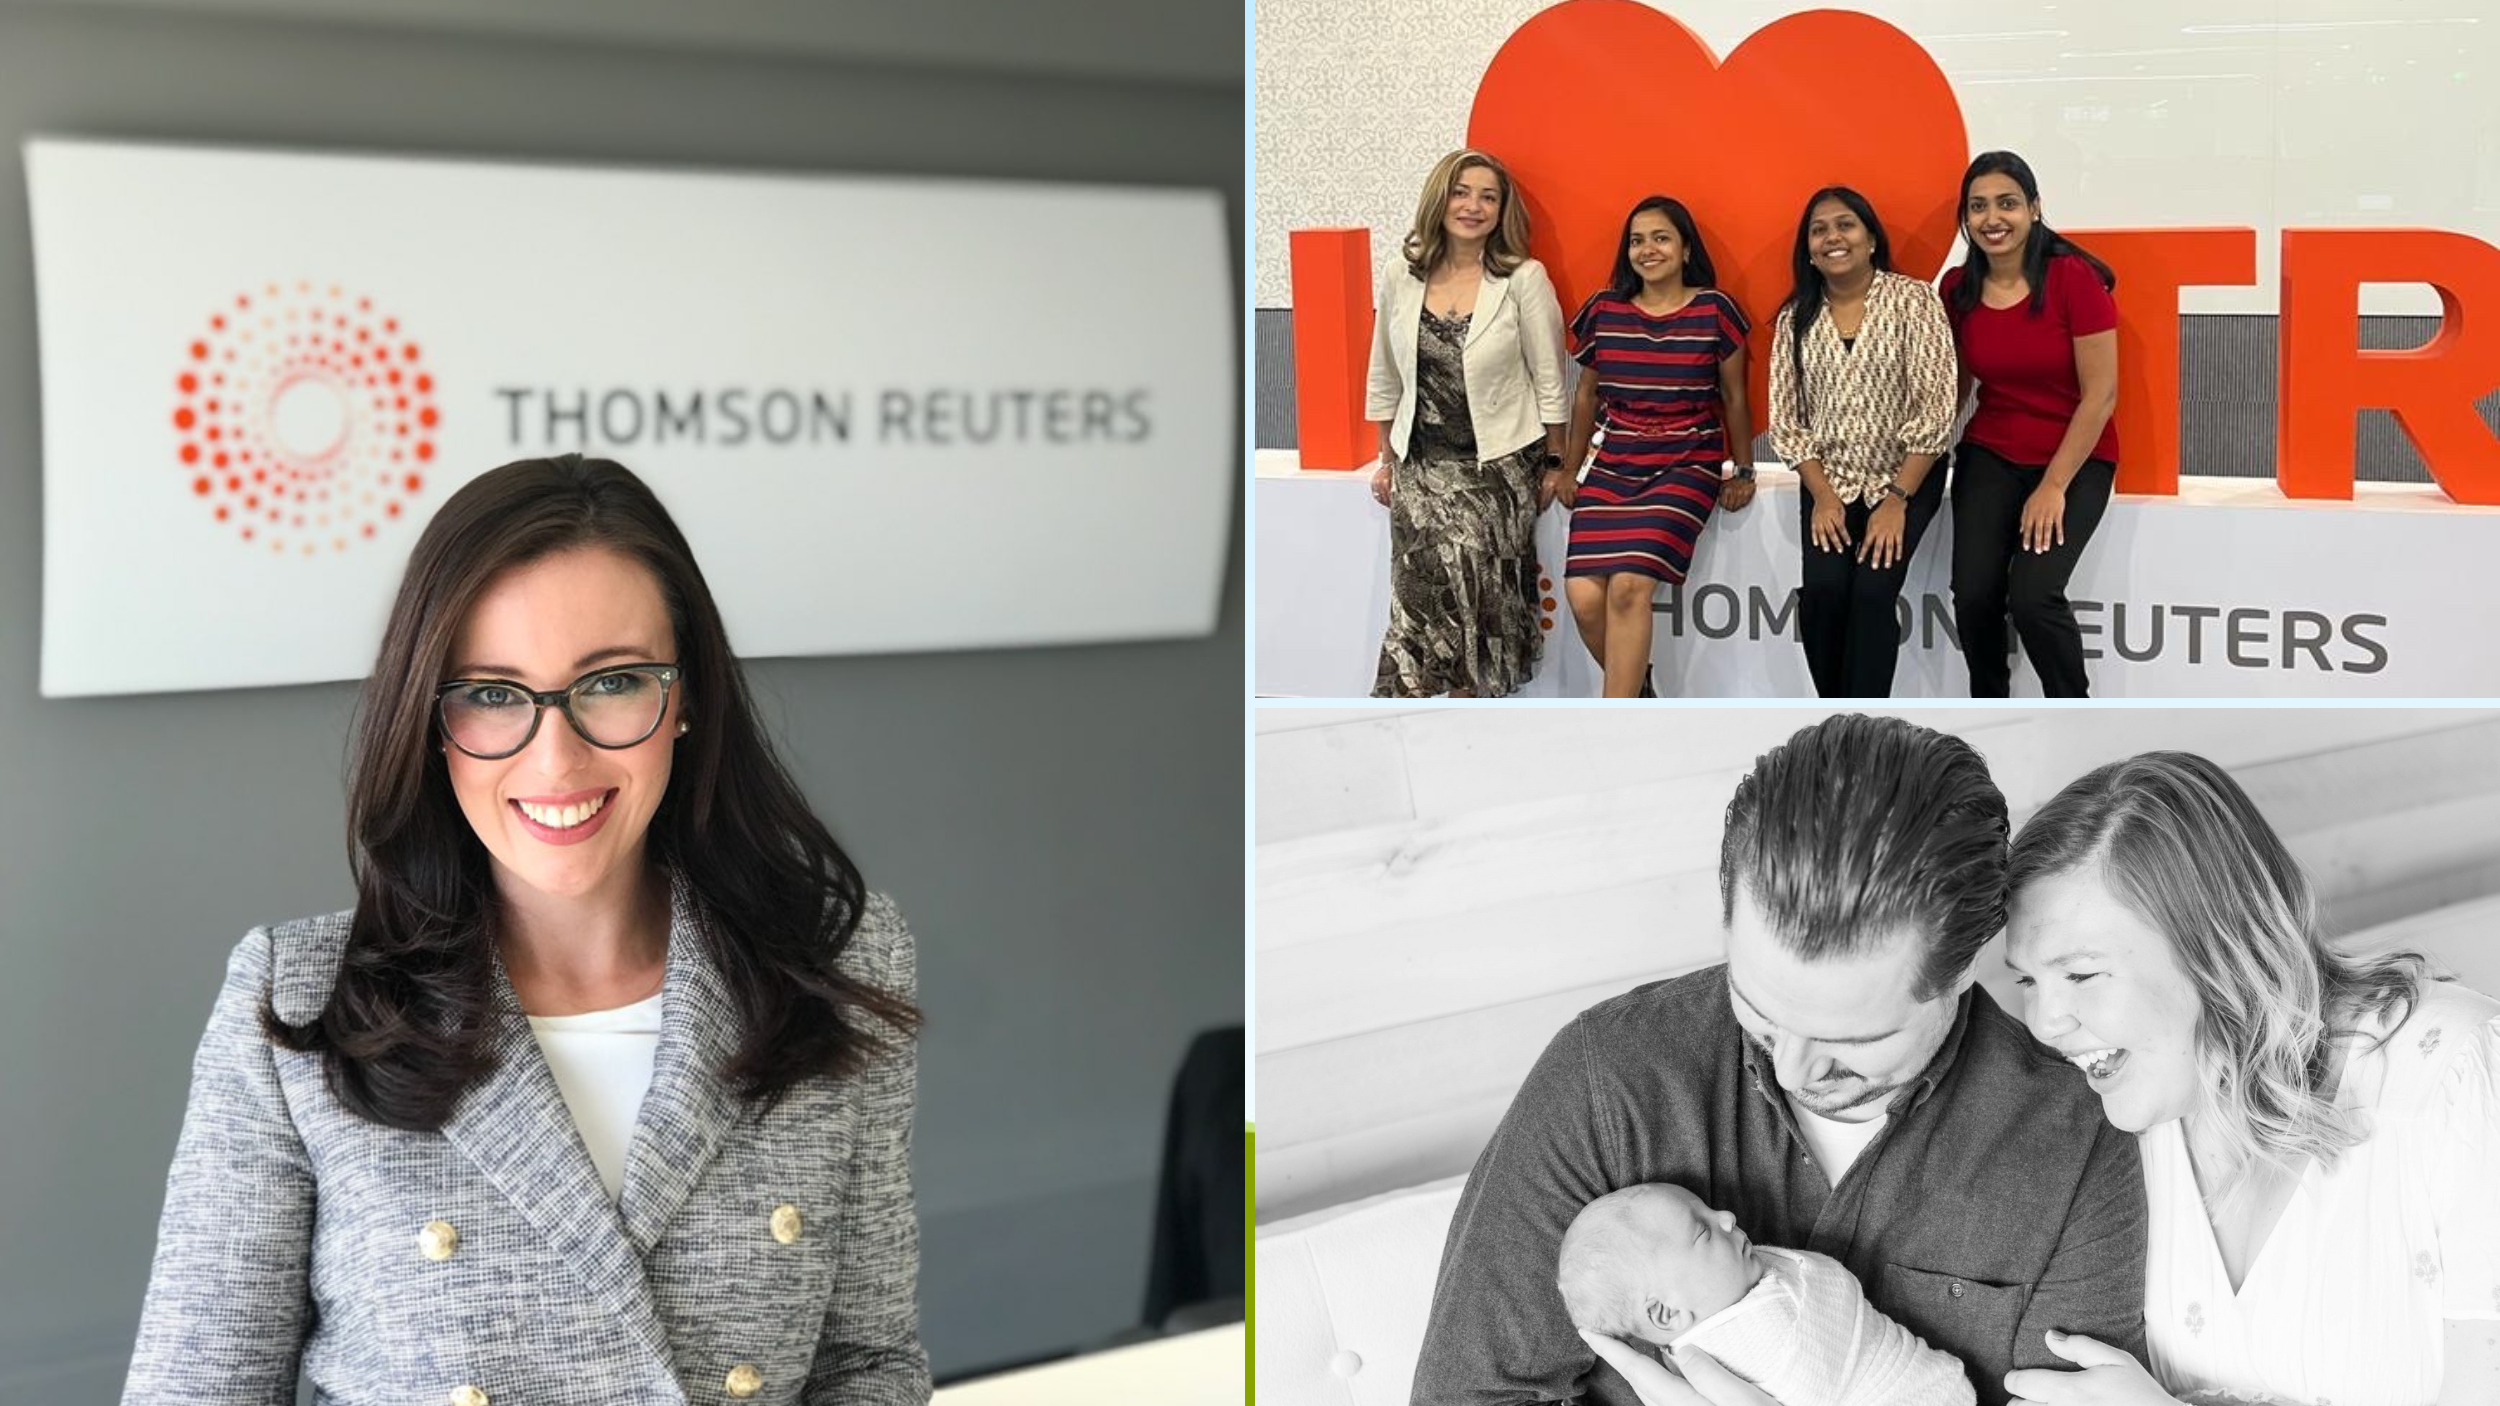 Haley and her partner holding their new baby close in their arms. Four teammates posing for a group photo in front of the I love Thomson Reuters sign in our Bangalore office. Tyrilly smiling while standing in front of the Thomson Reuters sign in our Australia office.